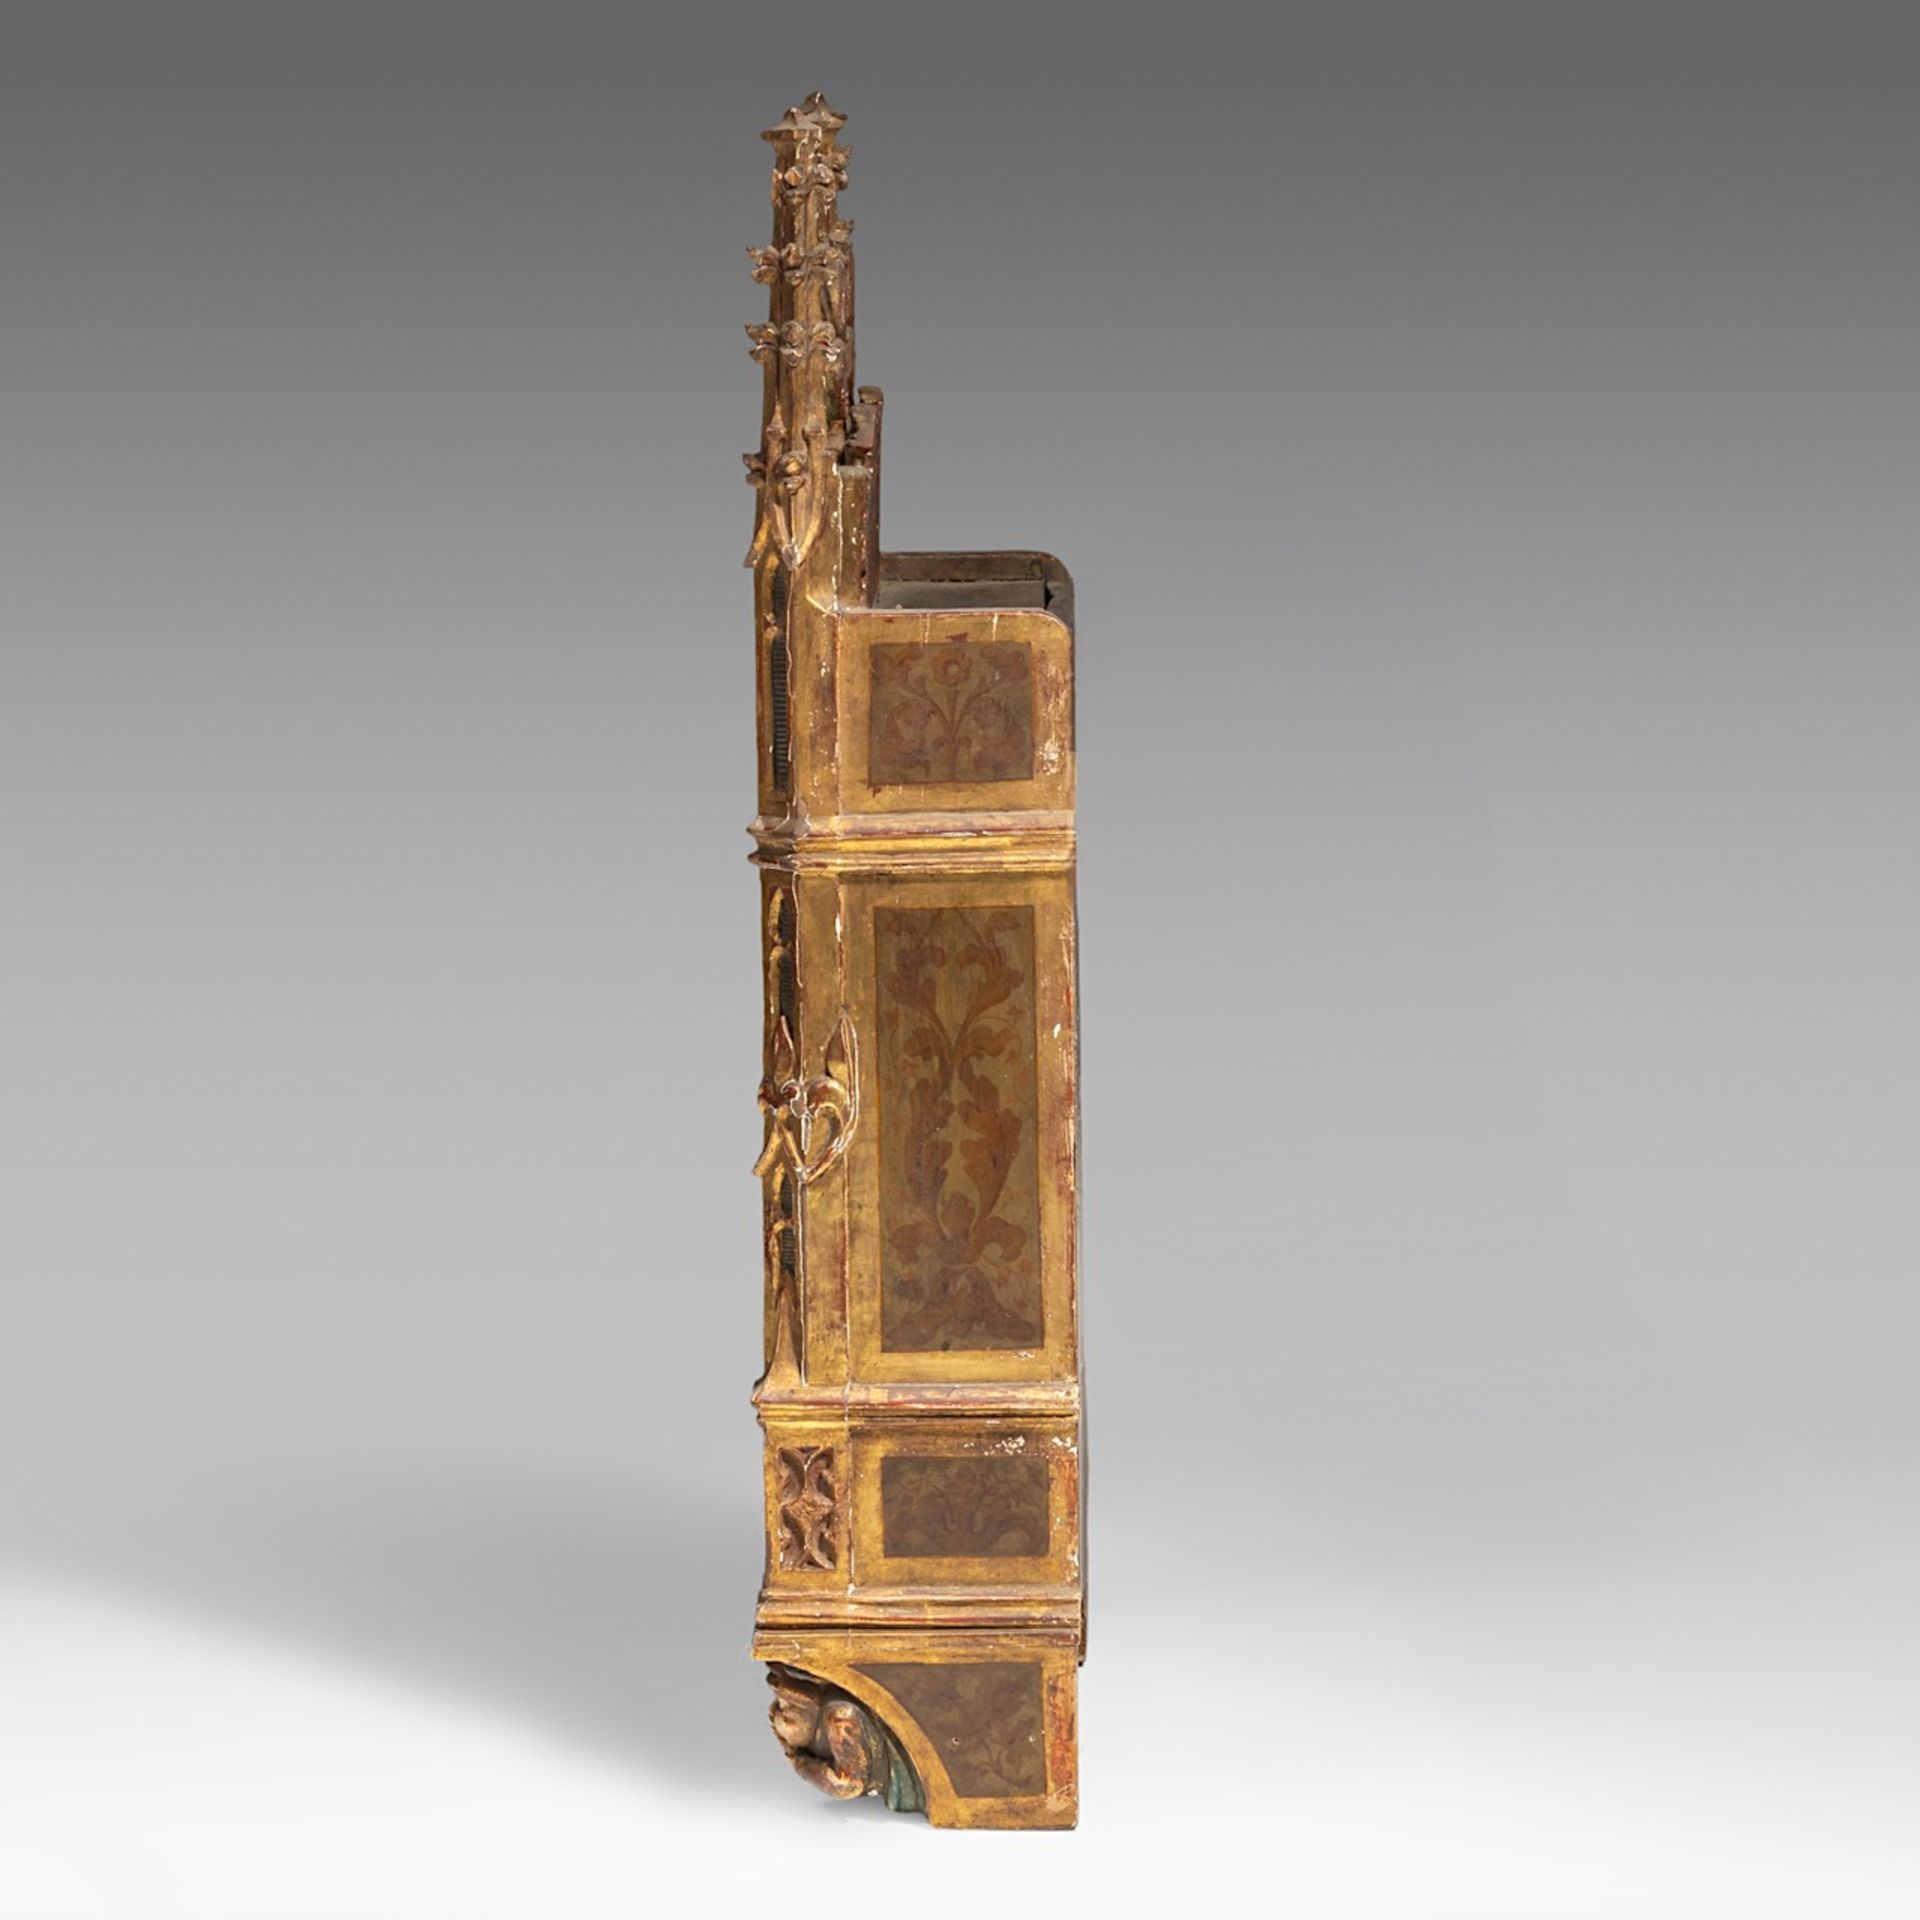 A finely sculpted polychrome and gilt wooden Gothic Revival shrine with a medieval court scene, H 80 - Bild 3 aus 8